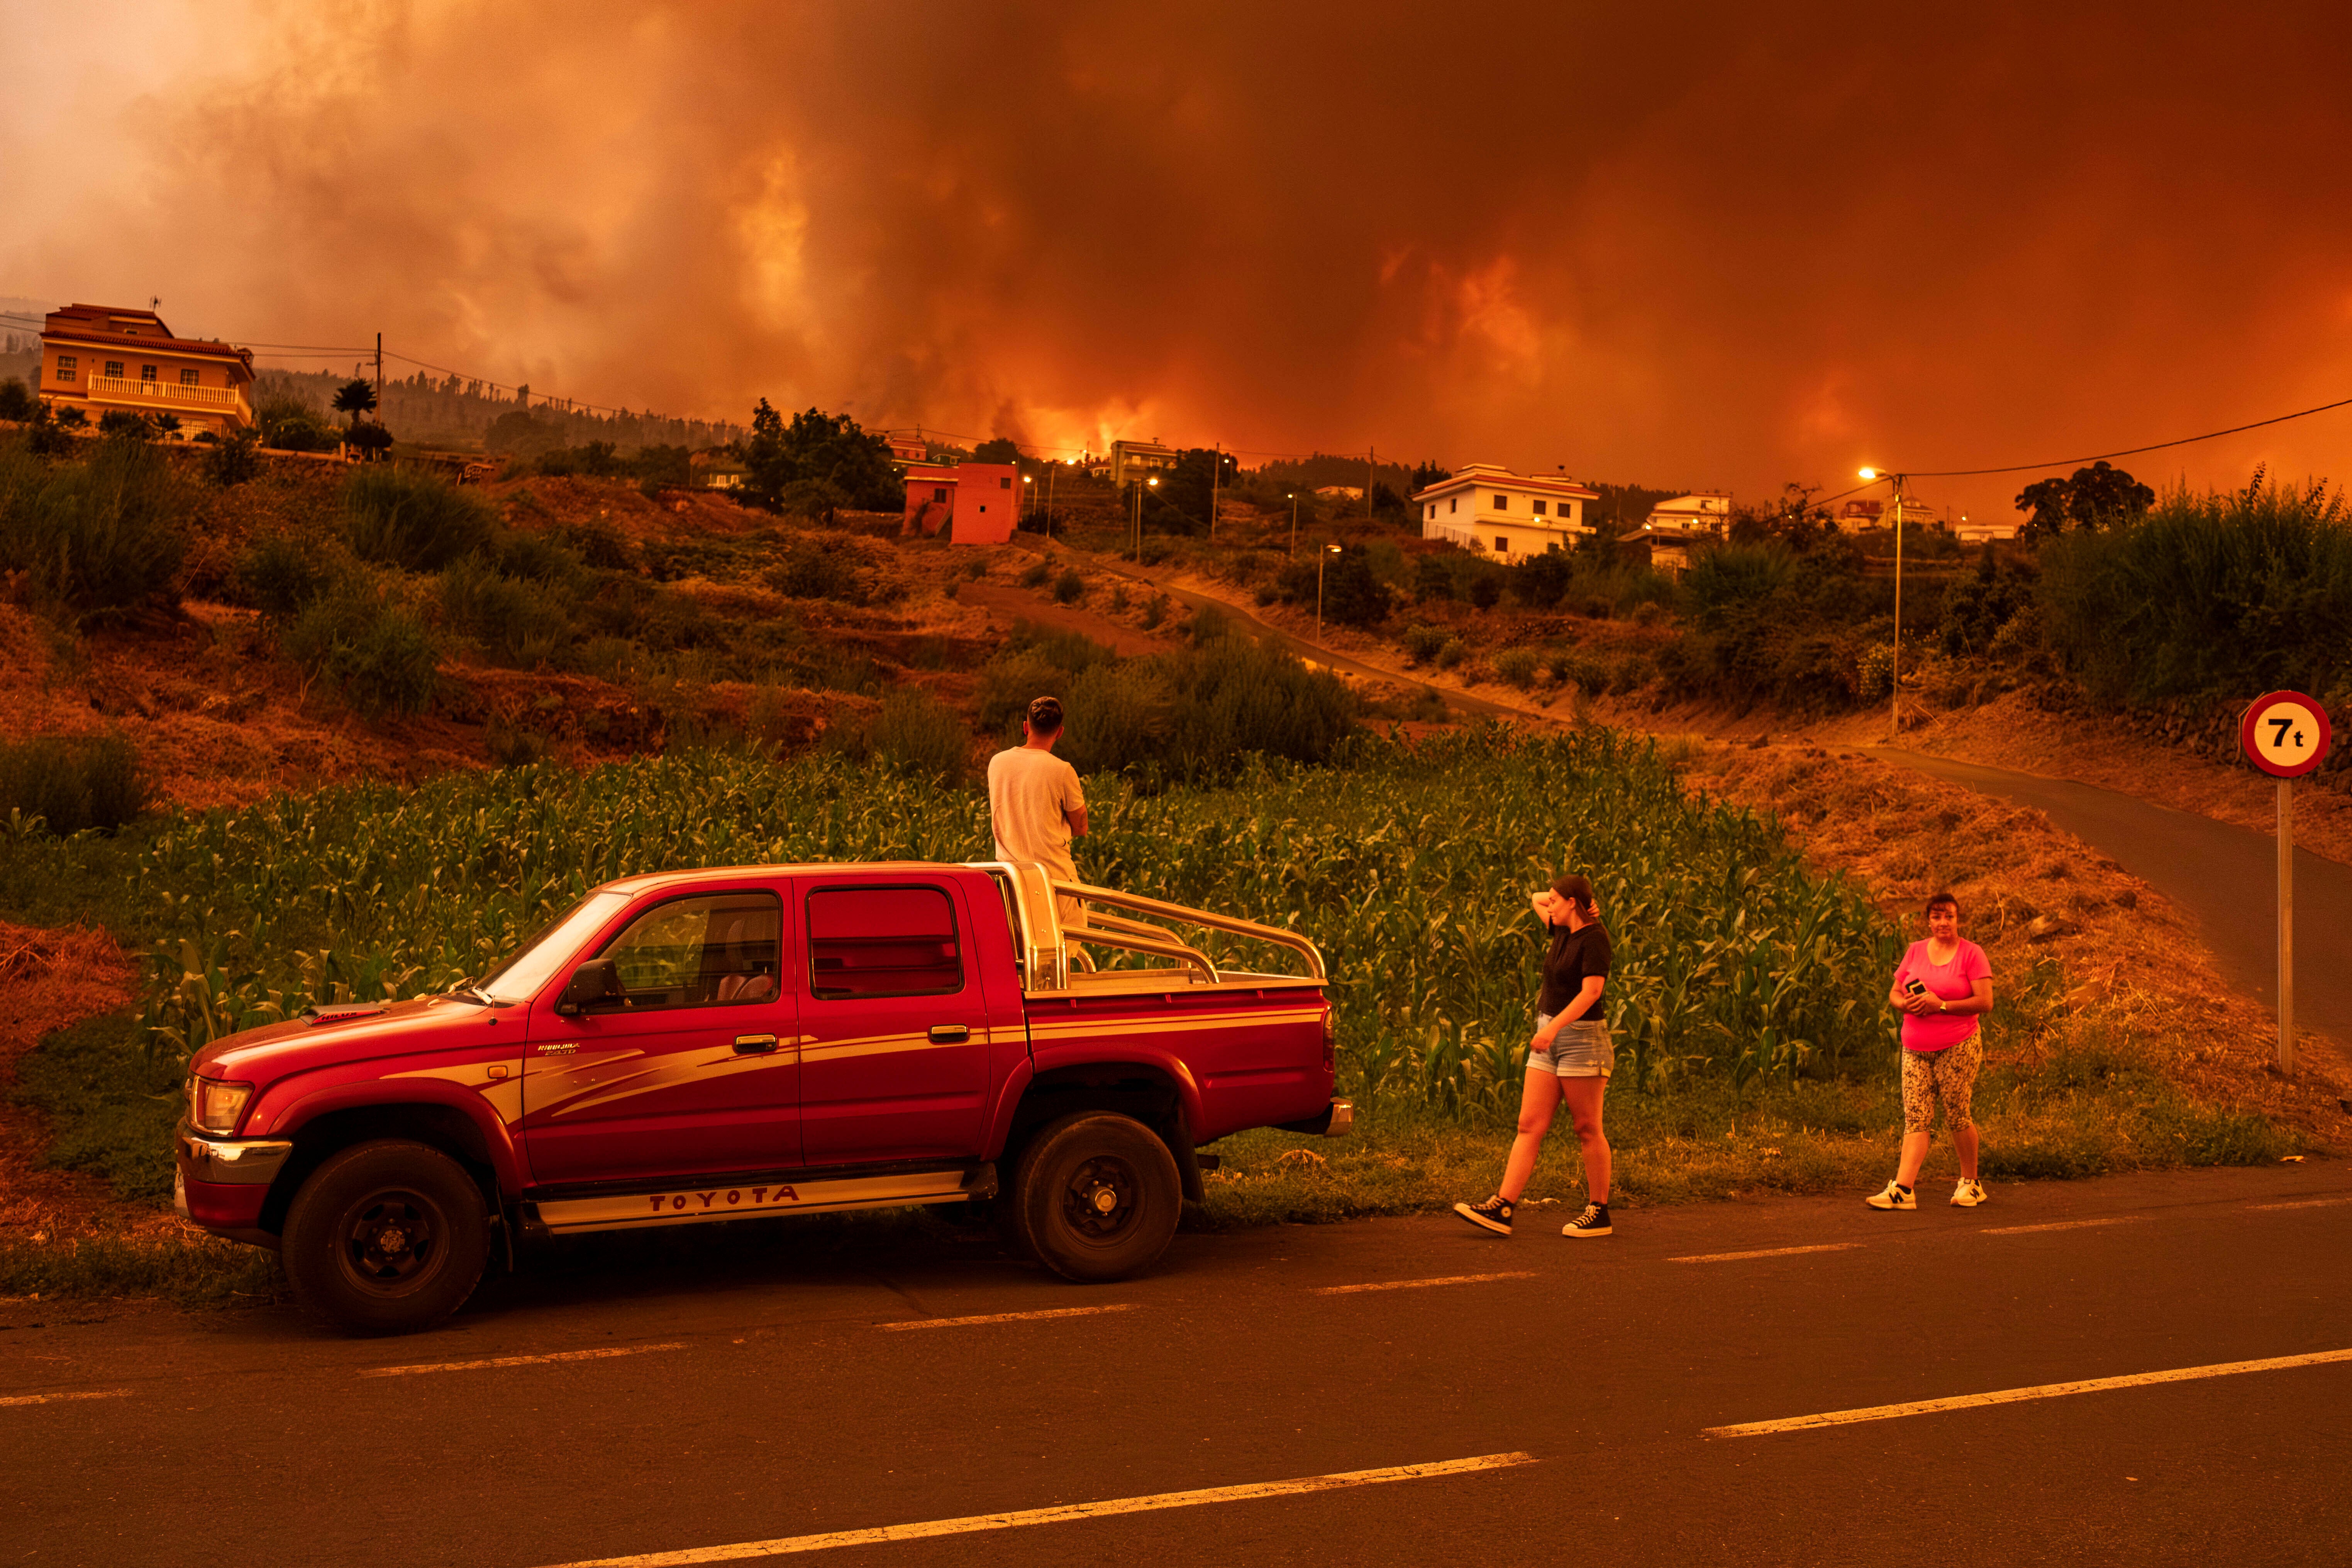 A raging wildfire that has torn through Tenerife was started deliberately, officials said